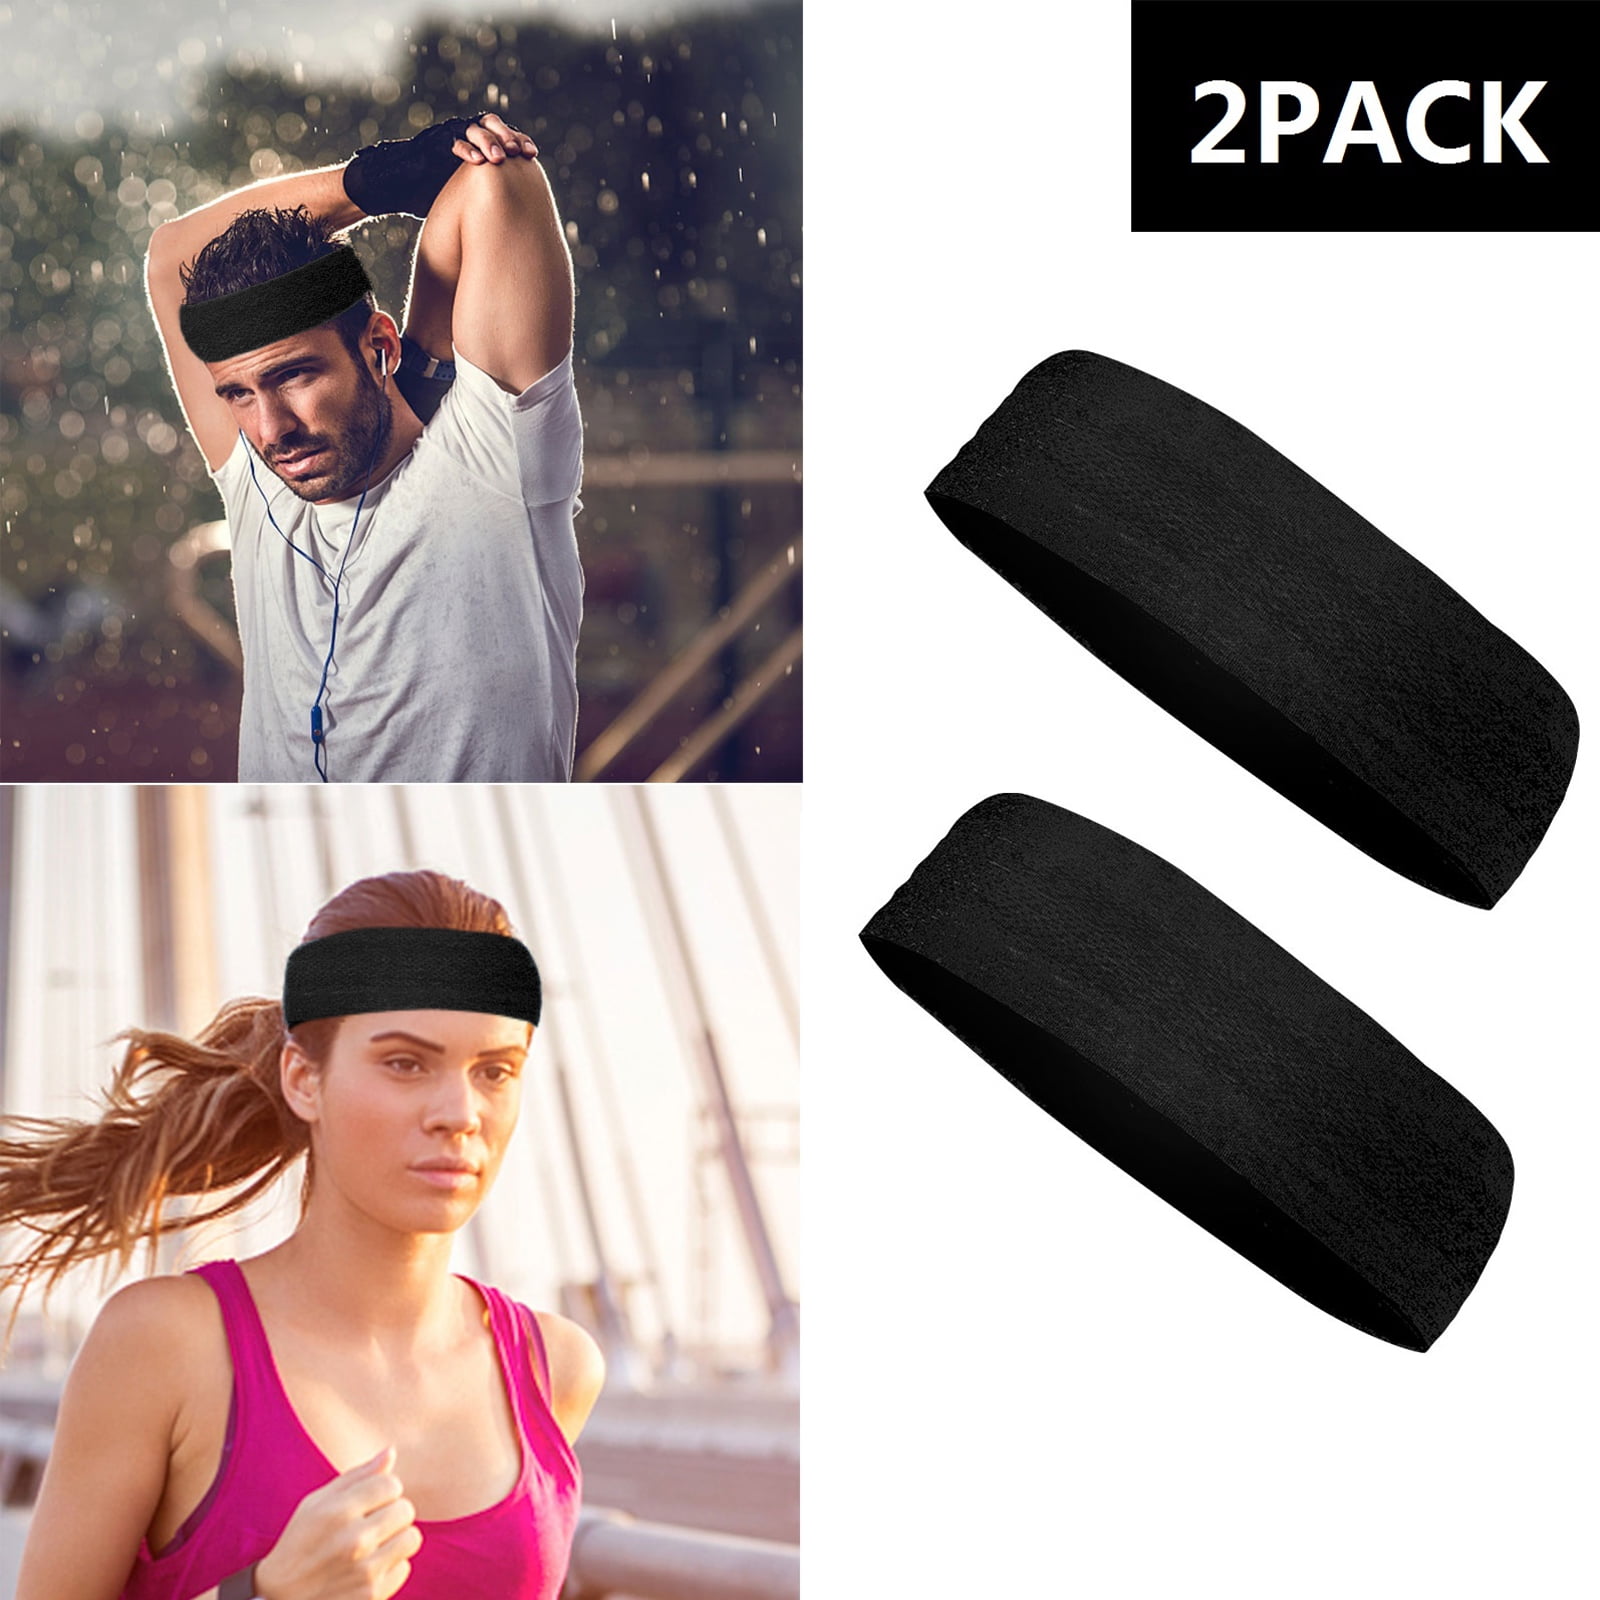 Fitness Yoga Sports Perspiration & Forehead Protection Suite for Running Workout Headbands for Women and Men Basketball 